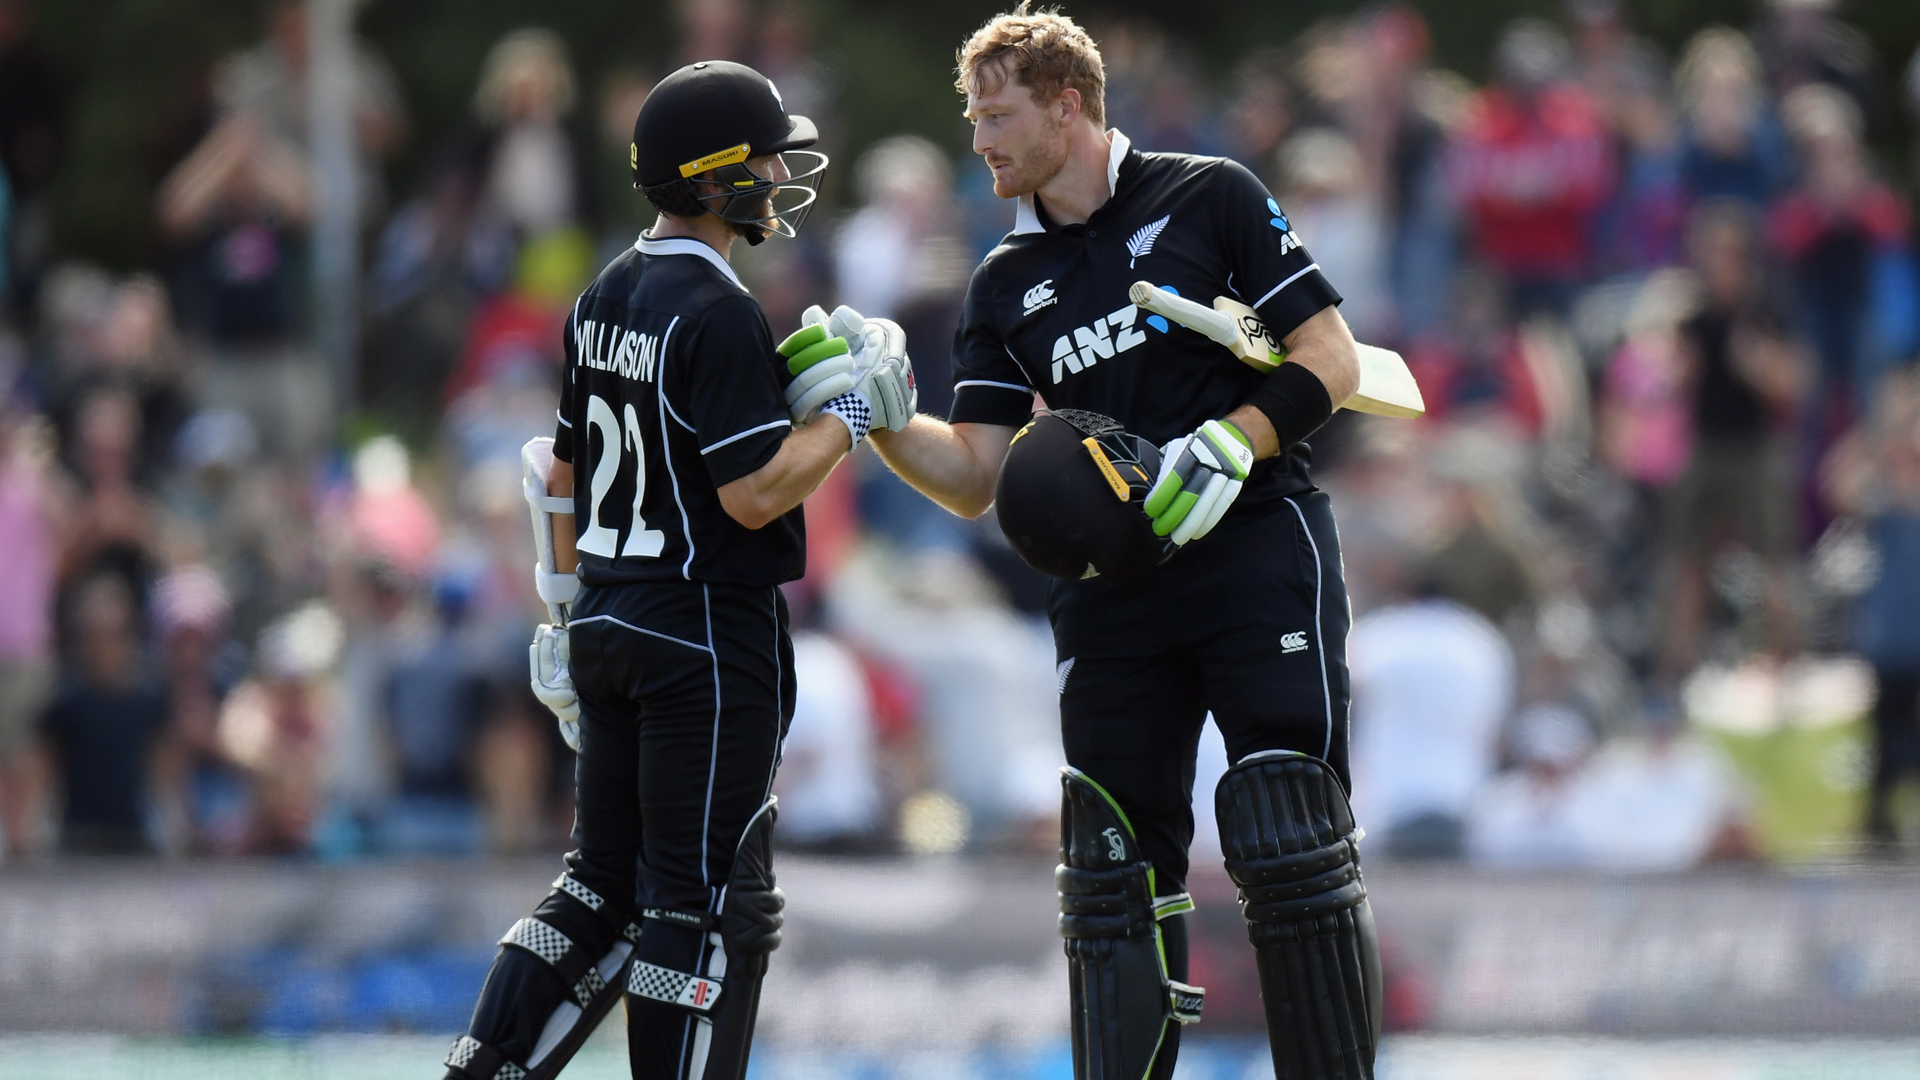 Another convincing ODI victory over Bangladesh pleased New Zealand captain Kane Williamson.